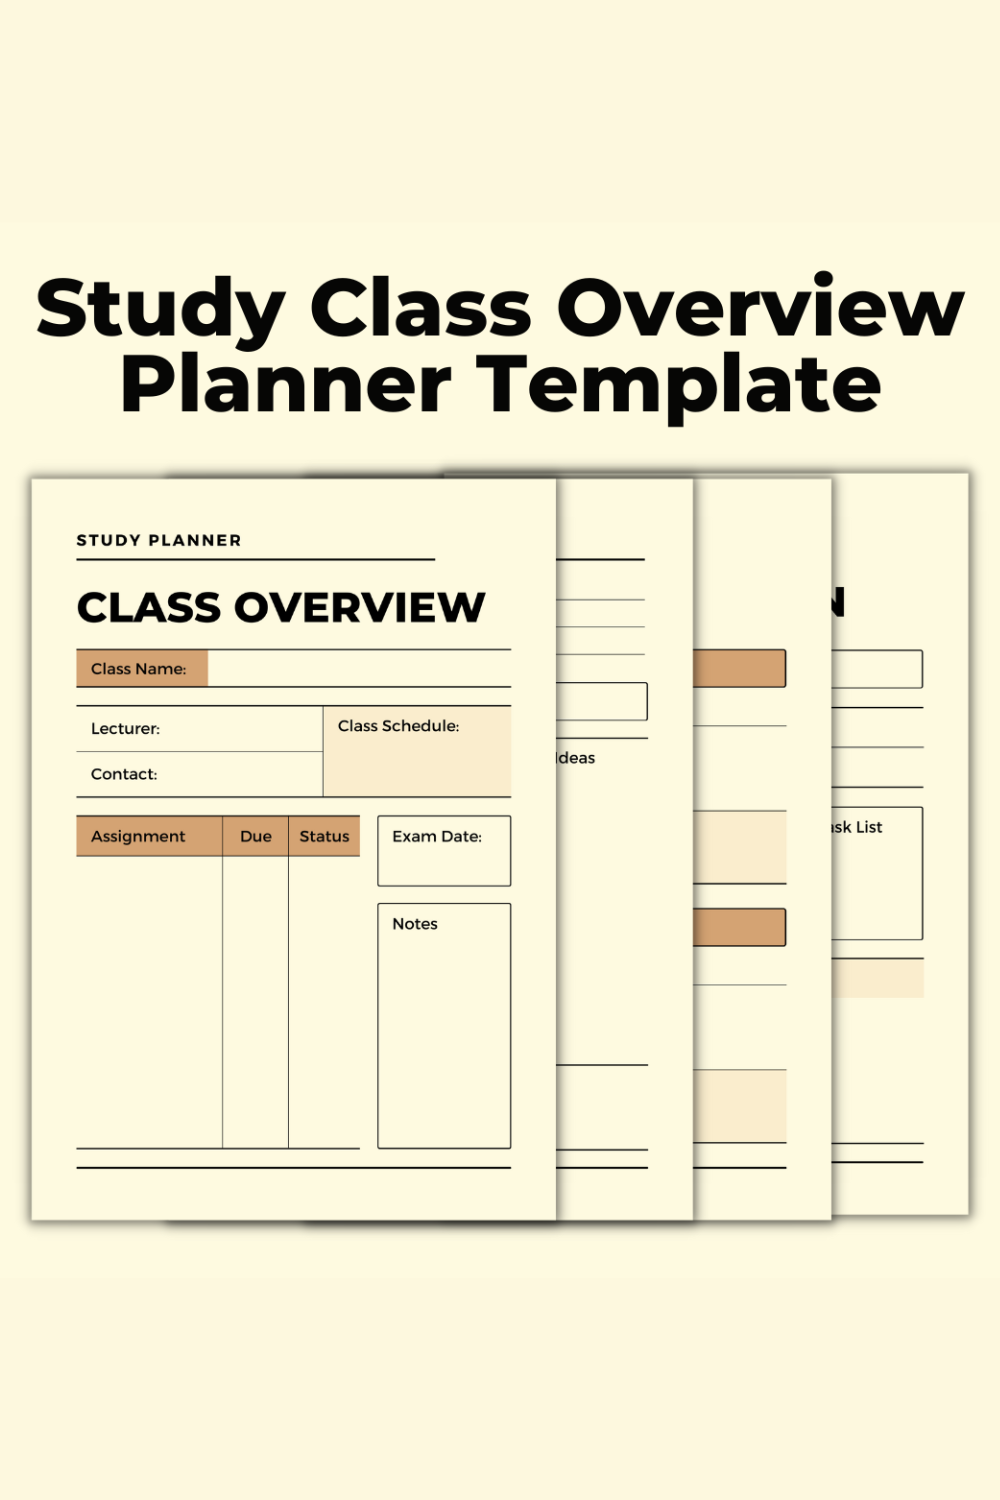 Study Class Overview Planner Canva Template pinterest preview image.